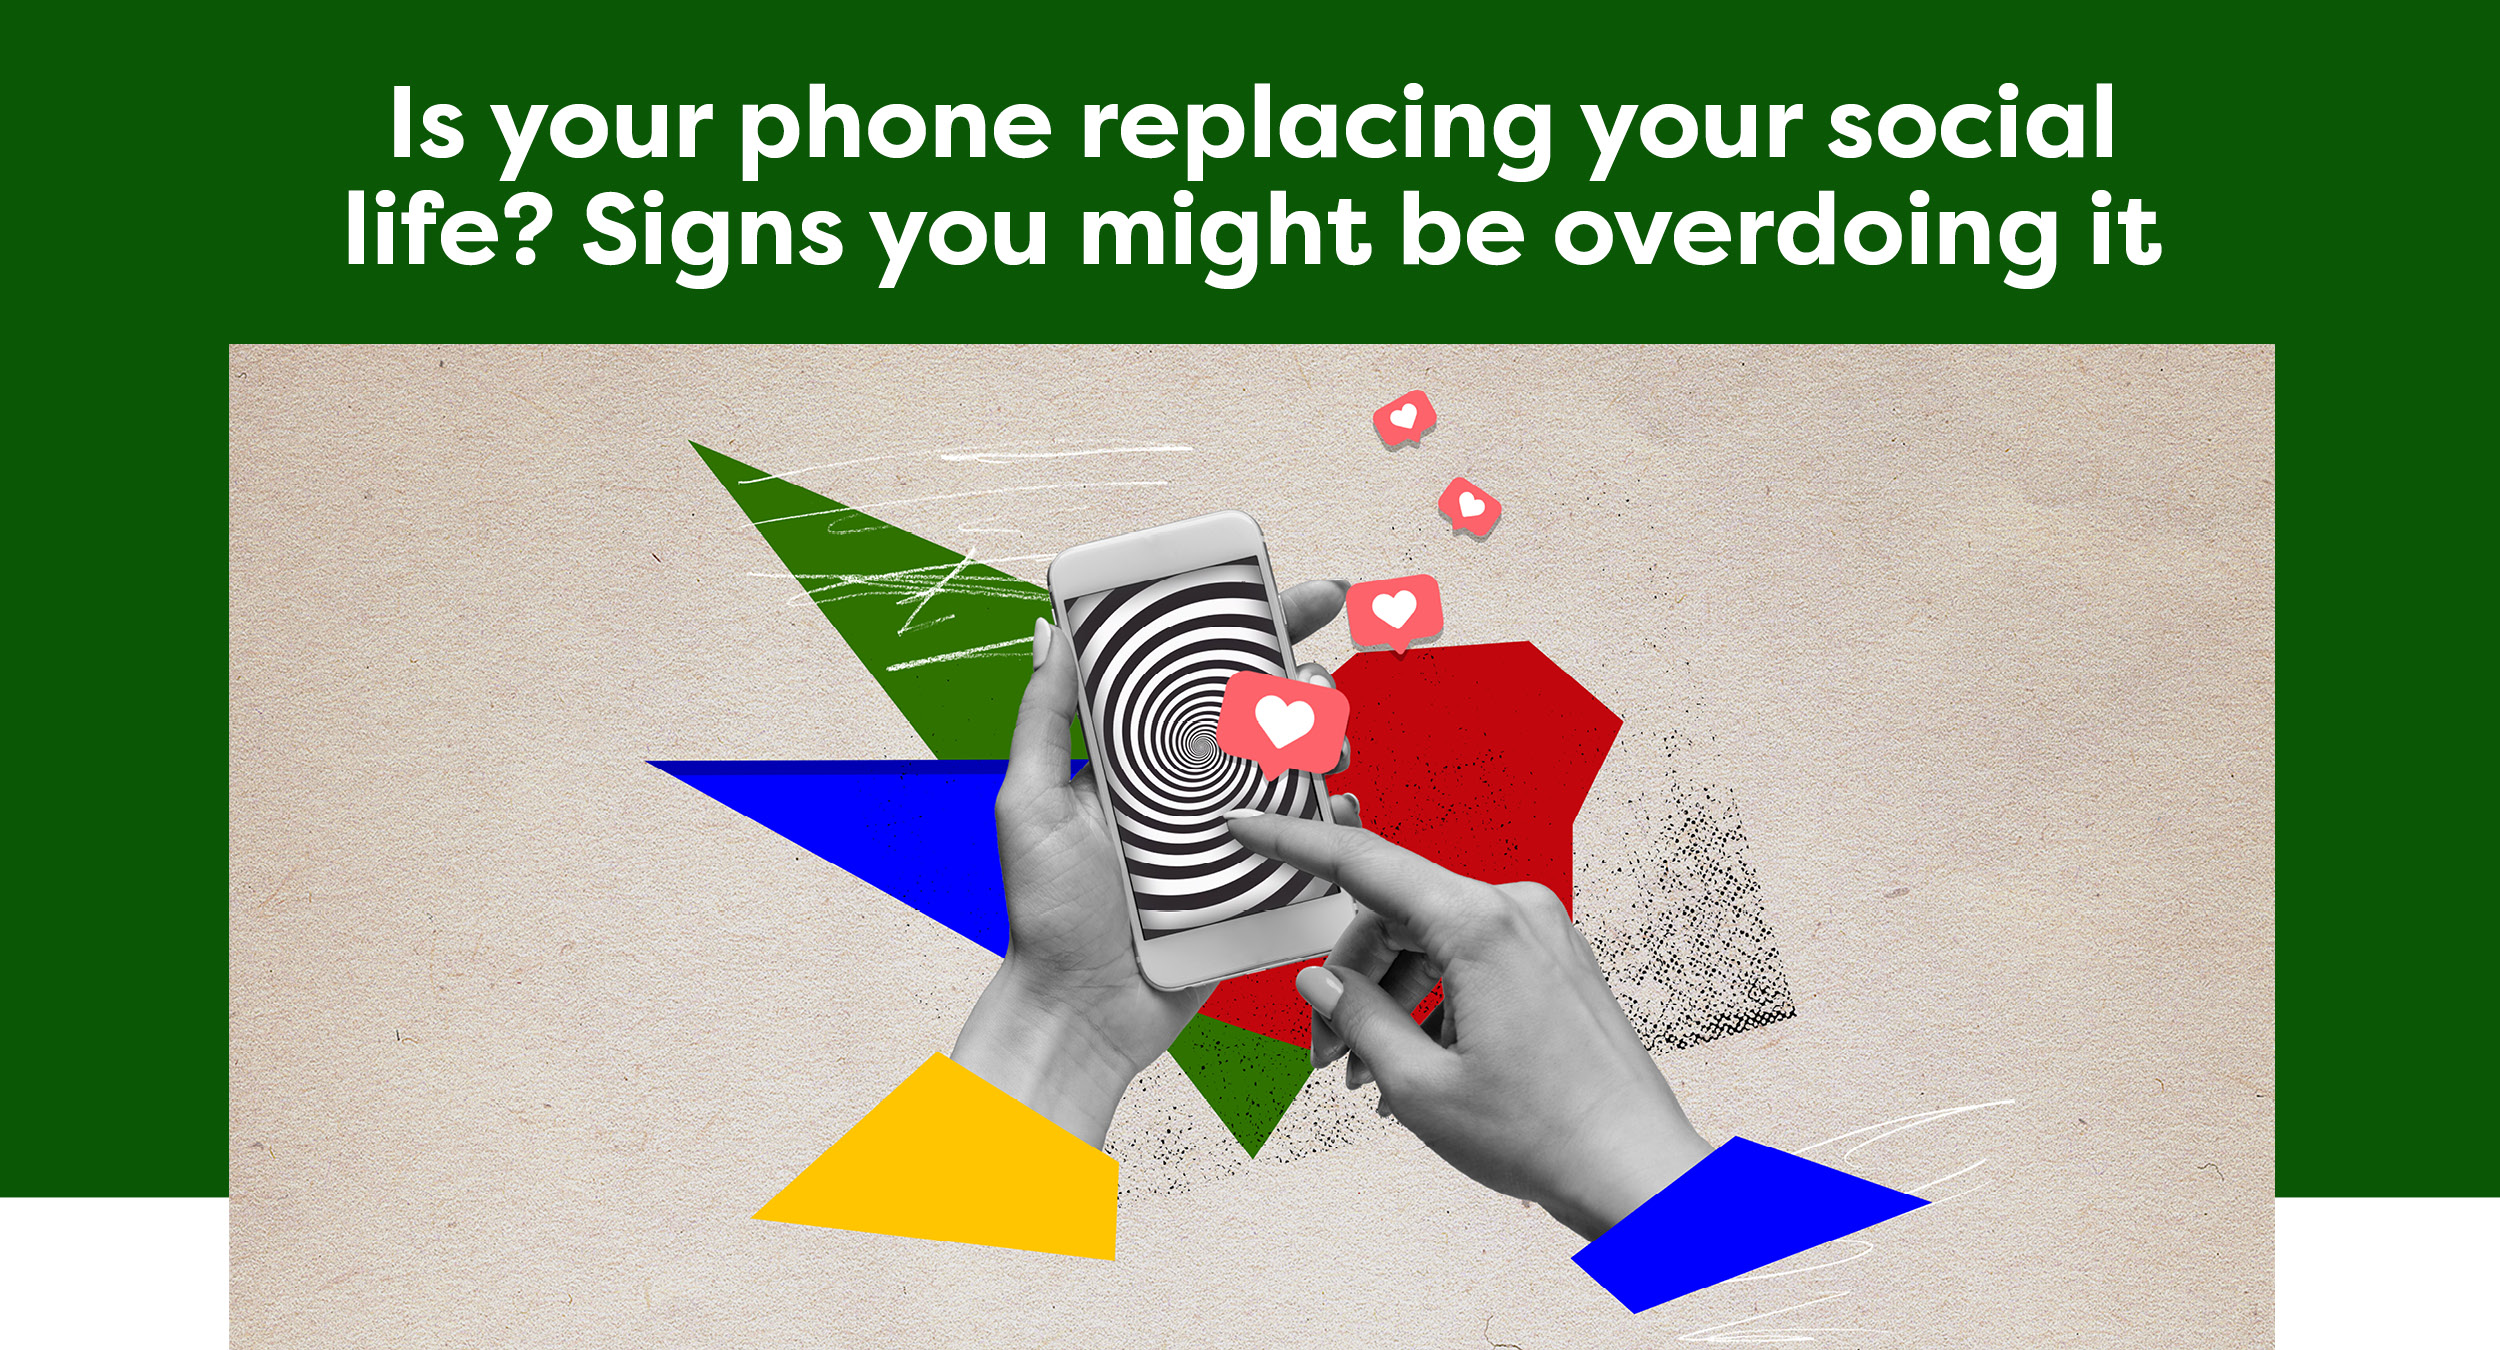 Is your phone replacing your social life? Signs you might be overdoing it